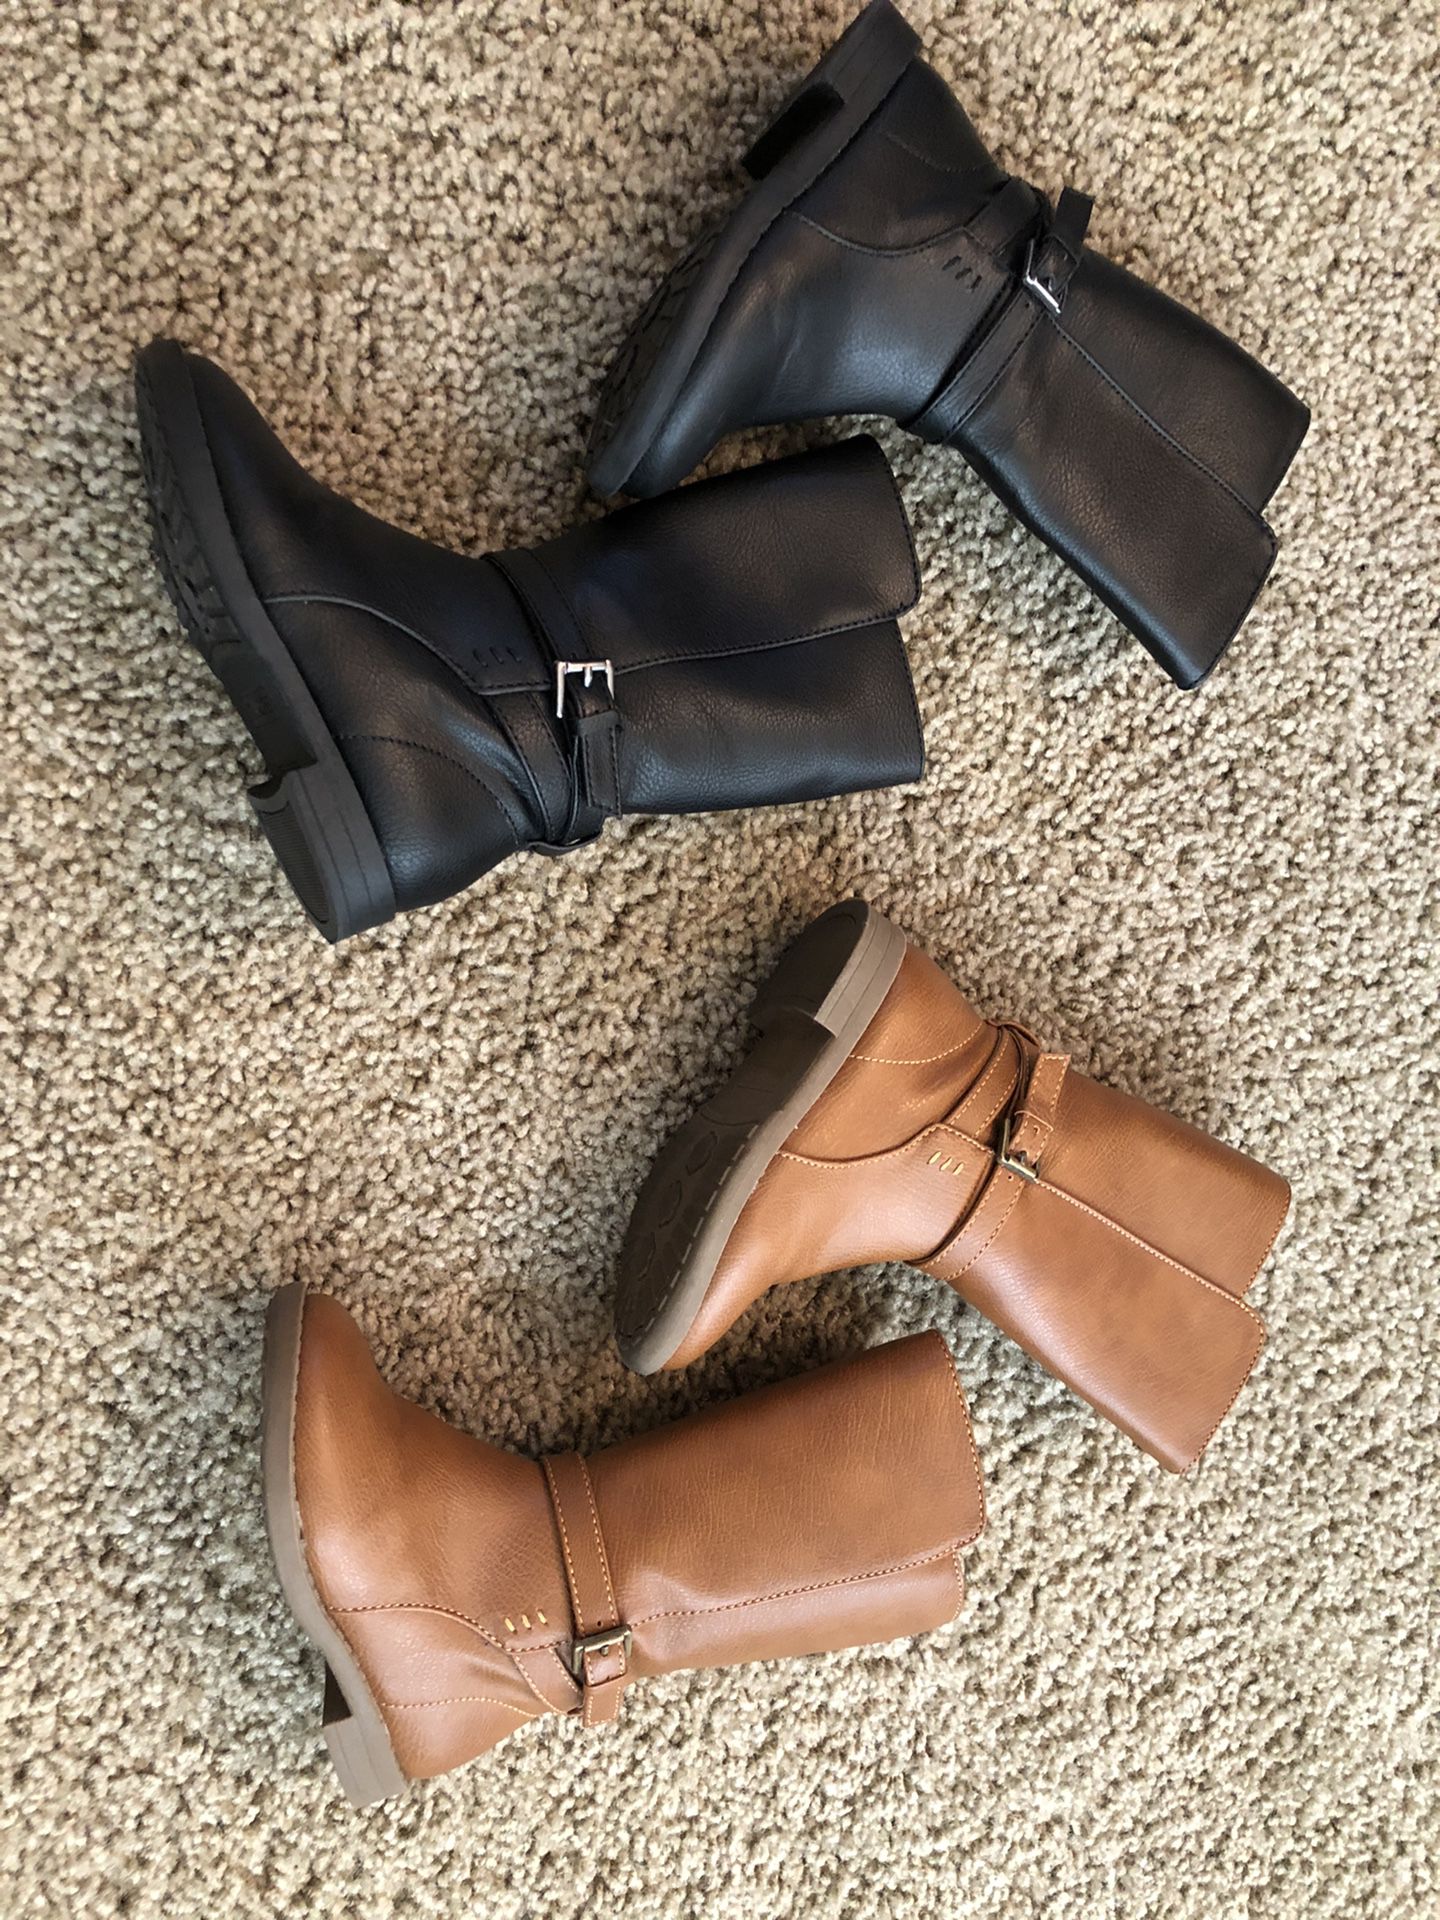 The Children’s Place toddler girl riding boots